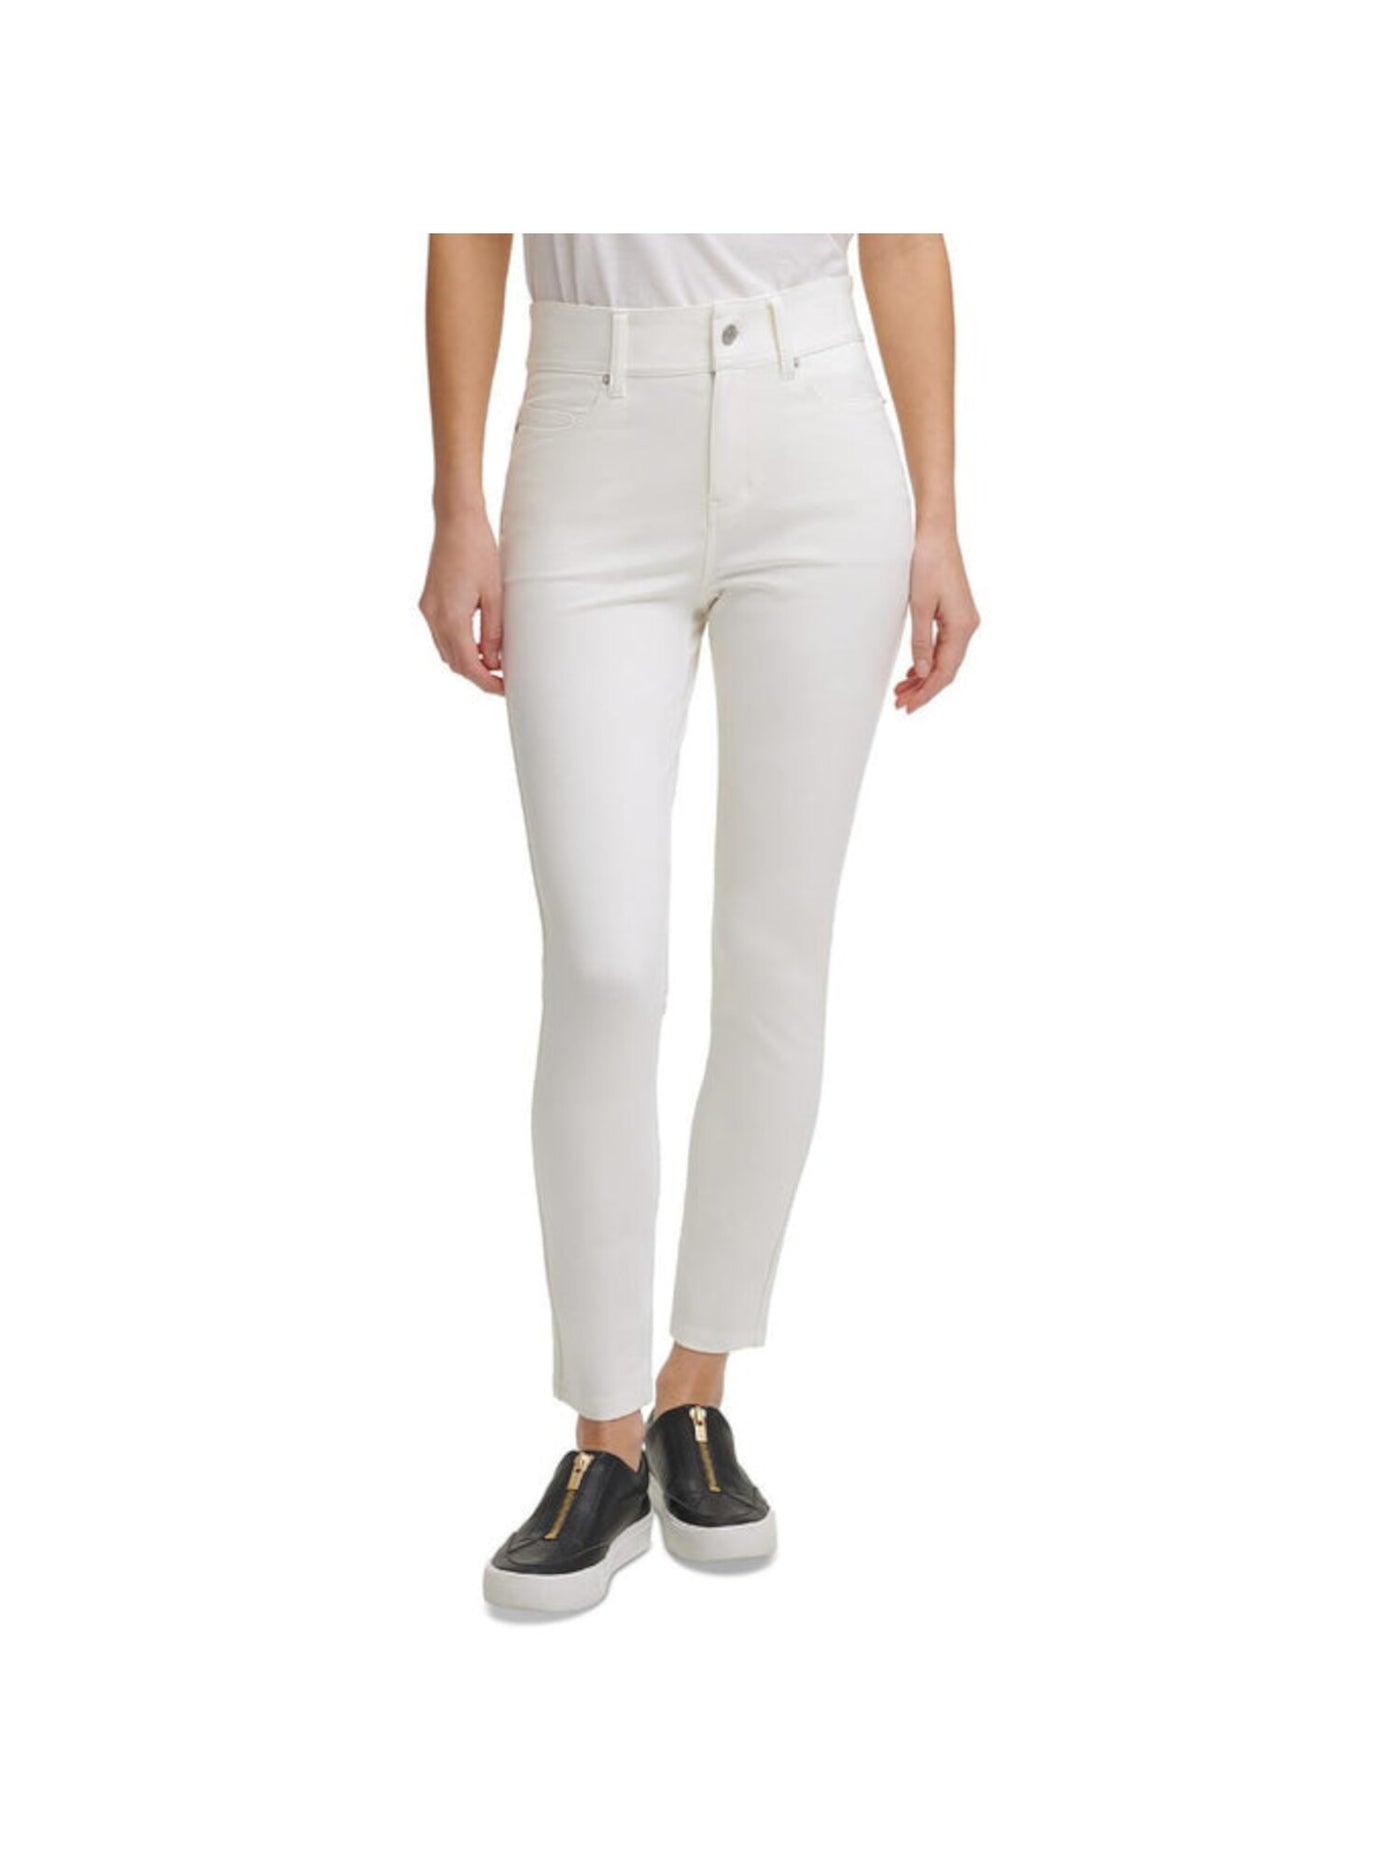 DKNY Womens Ivory Stretch Pocketed Mid-rise Skinny Jeans 6